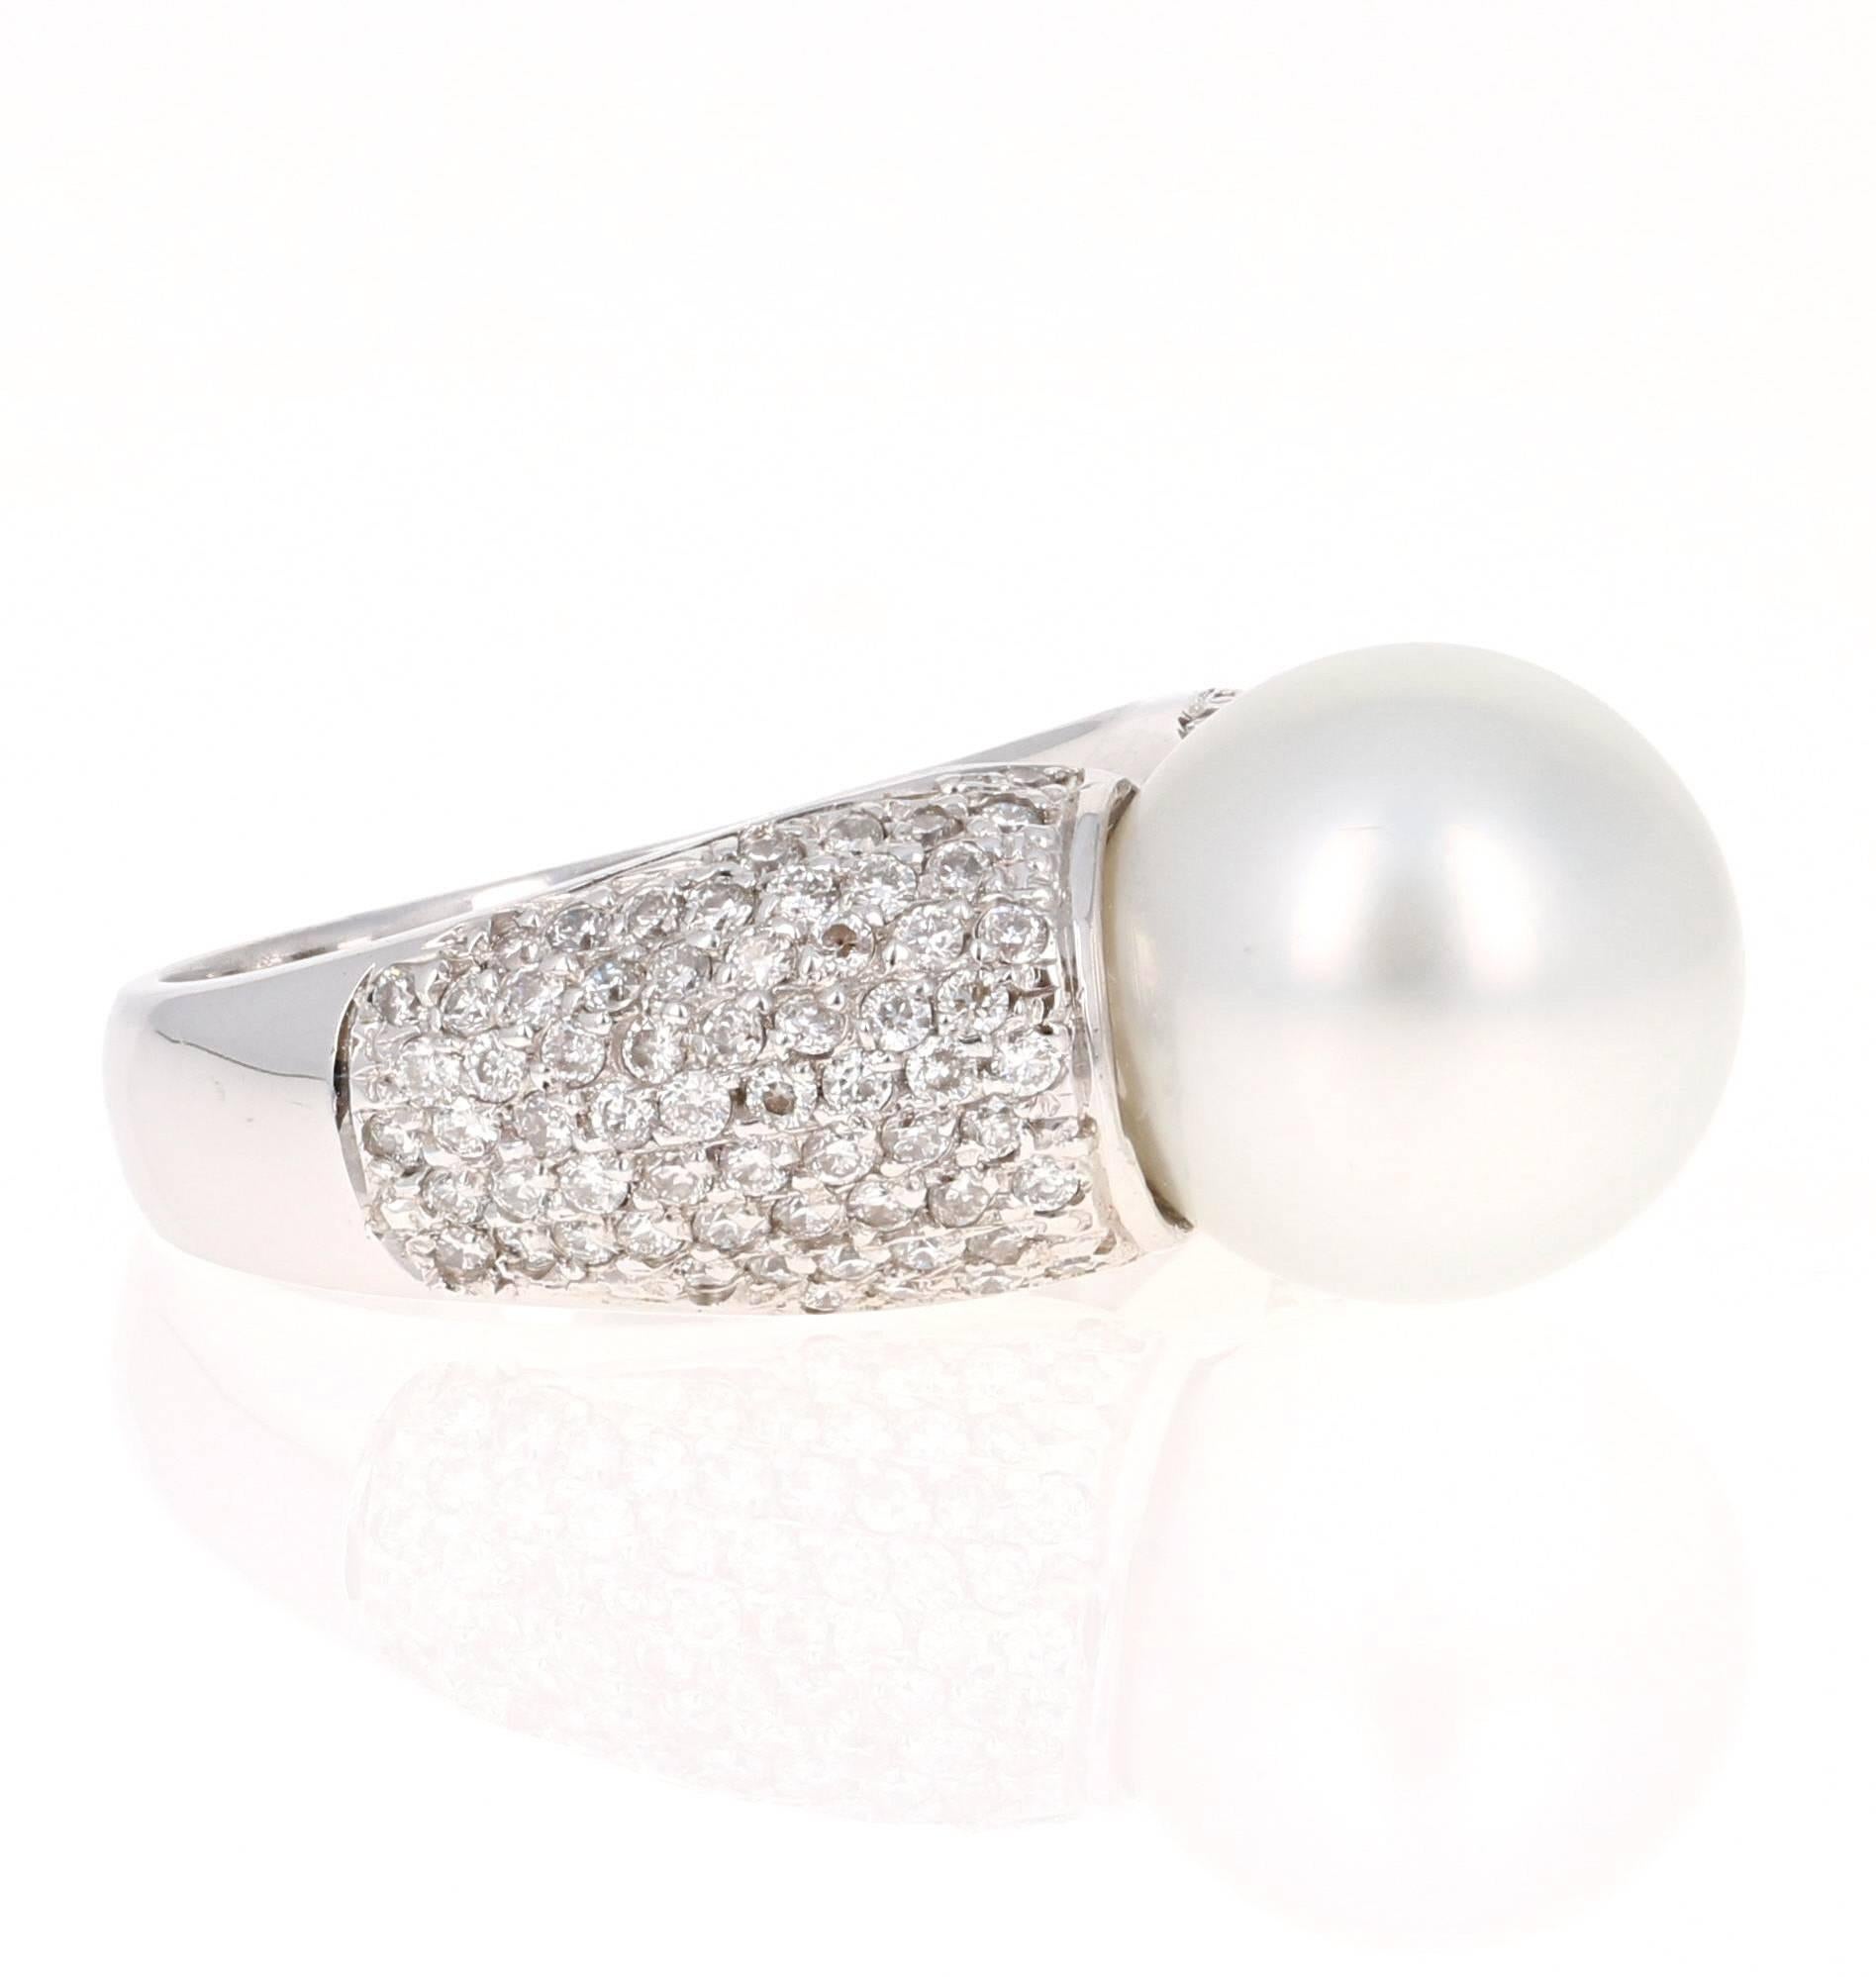 This dome like South Sea Pearl Ring is a remarkable beauty...0.90 Carat South Sea Pearl Diamond White Gold Cocktail Ring

The lustrous White South Sea Pearl is 10 mm with 135 Round Cut Diamonds that weigh 0.90 Carats. It is delicately crafted in 14K